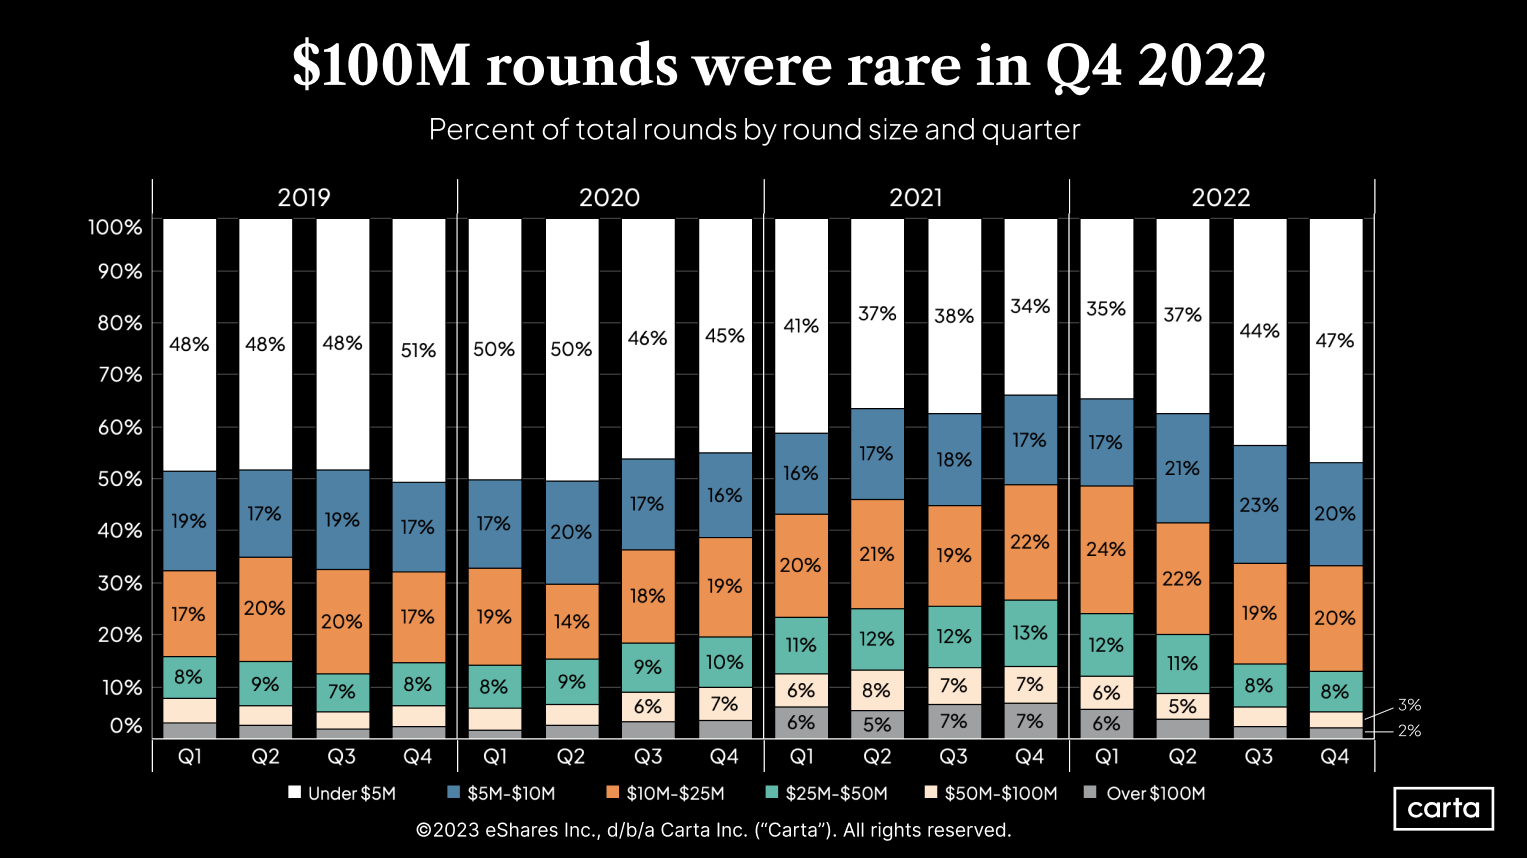 Percent of total rounds by round size and quarter, 2019-2022